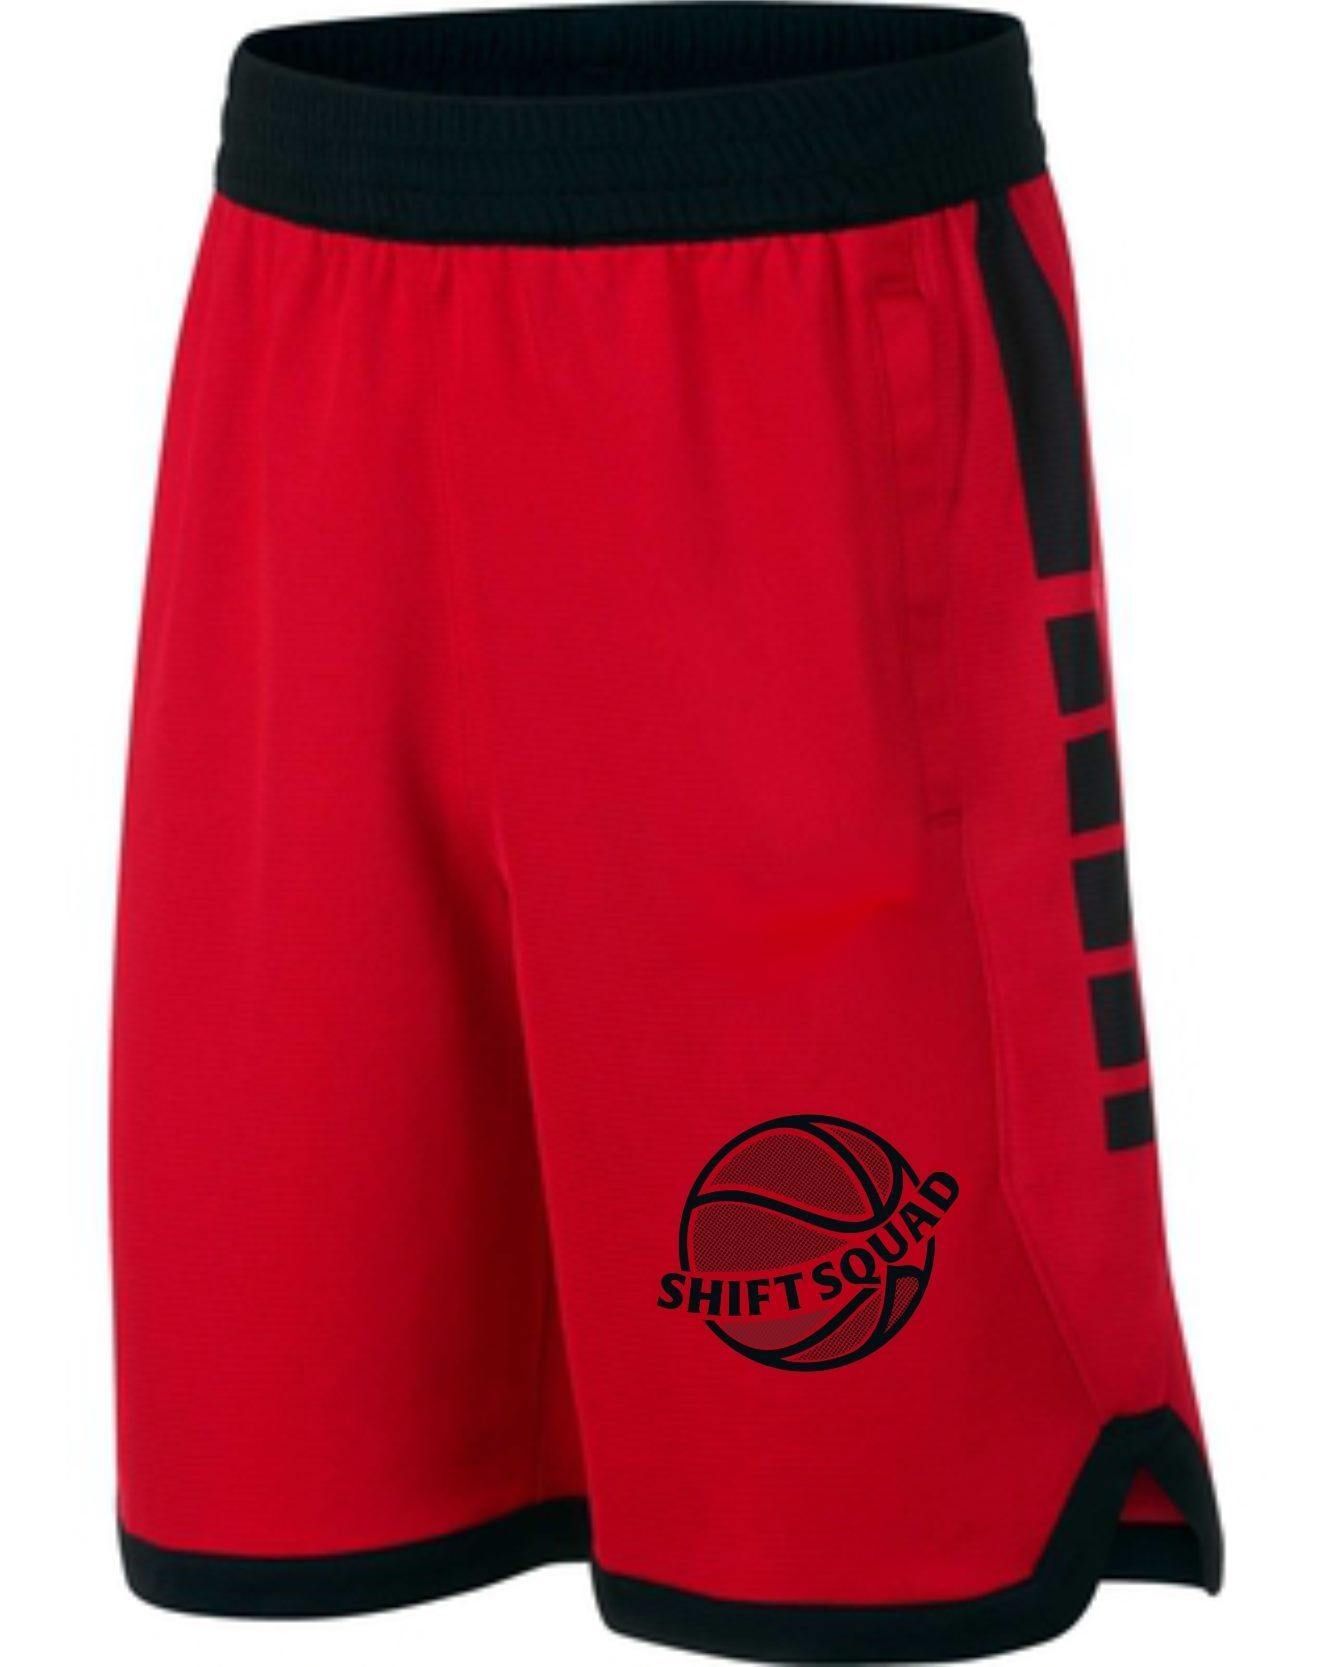 Red and Black Shiftsquad Men's basketball shorts Fall and Winter Line - Shiftsquad